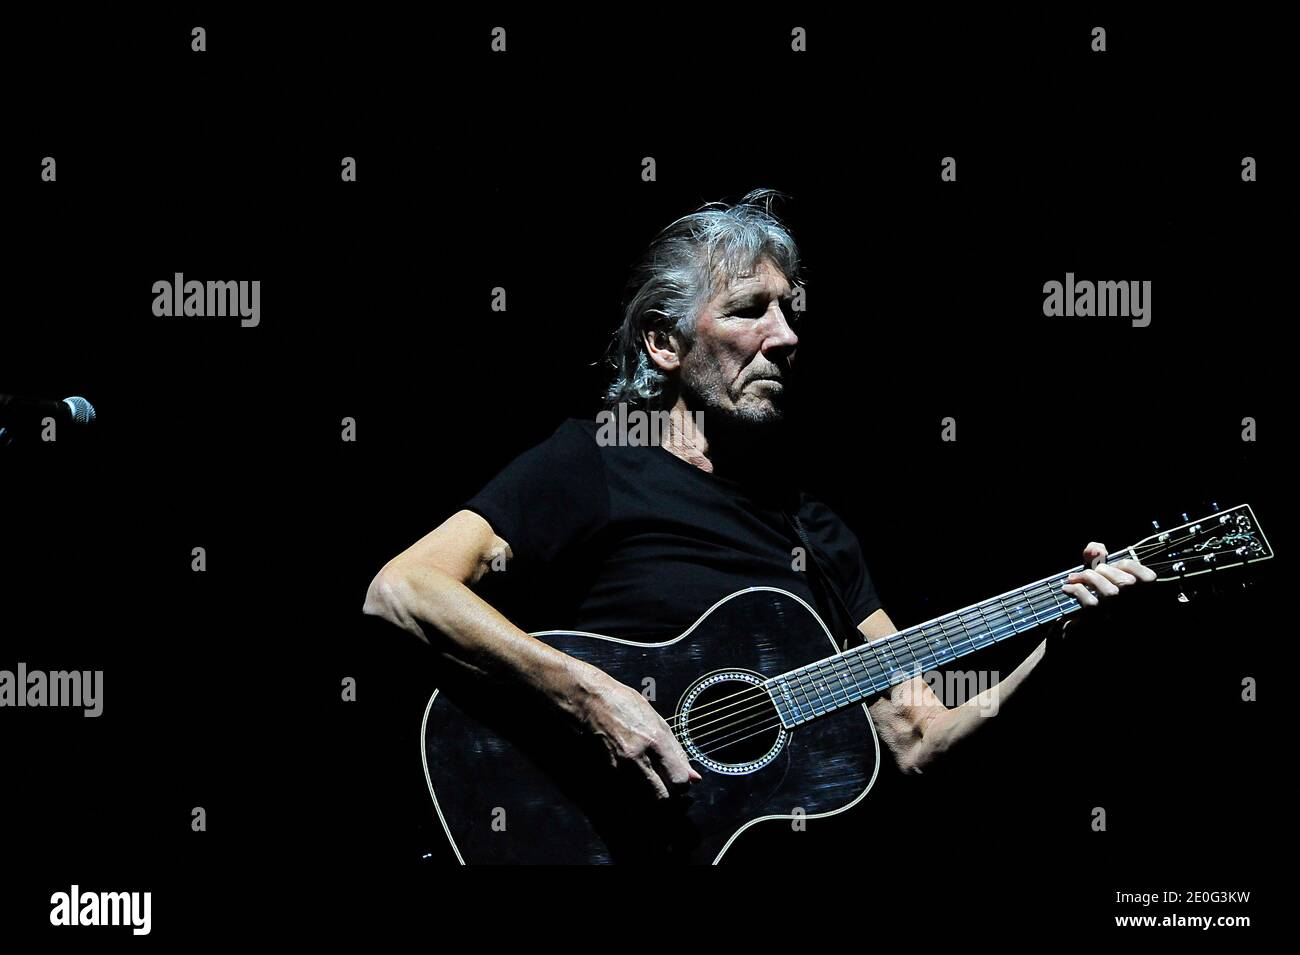 Roger Waters from Pink Floyd, along with guitarist G.E. Smith, perform Pink Flloyd's classic song "The Wall" at a soldout show at Wrigley Field in Chicago, IL, USA on June 08, 2012. Photo by Cindy Barrymore/ABACAPRESS.COM Stock Photo